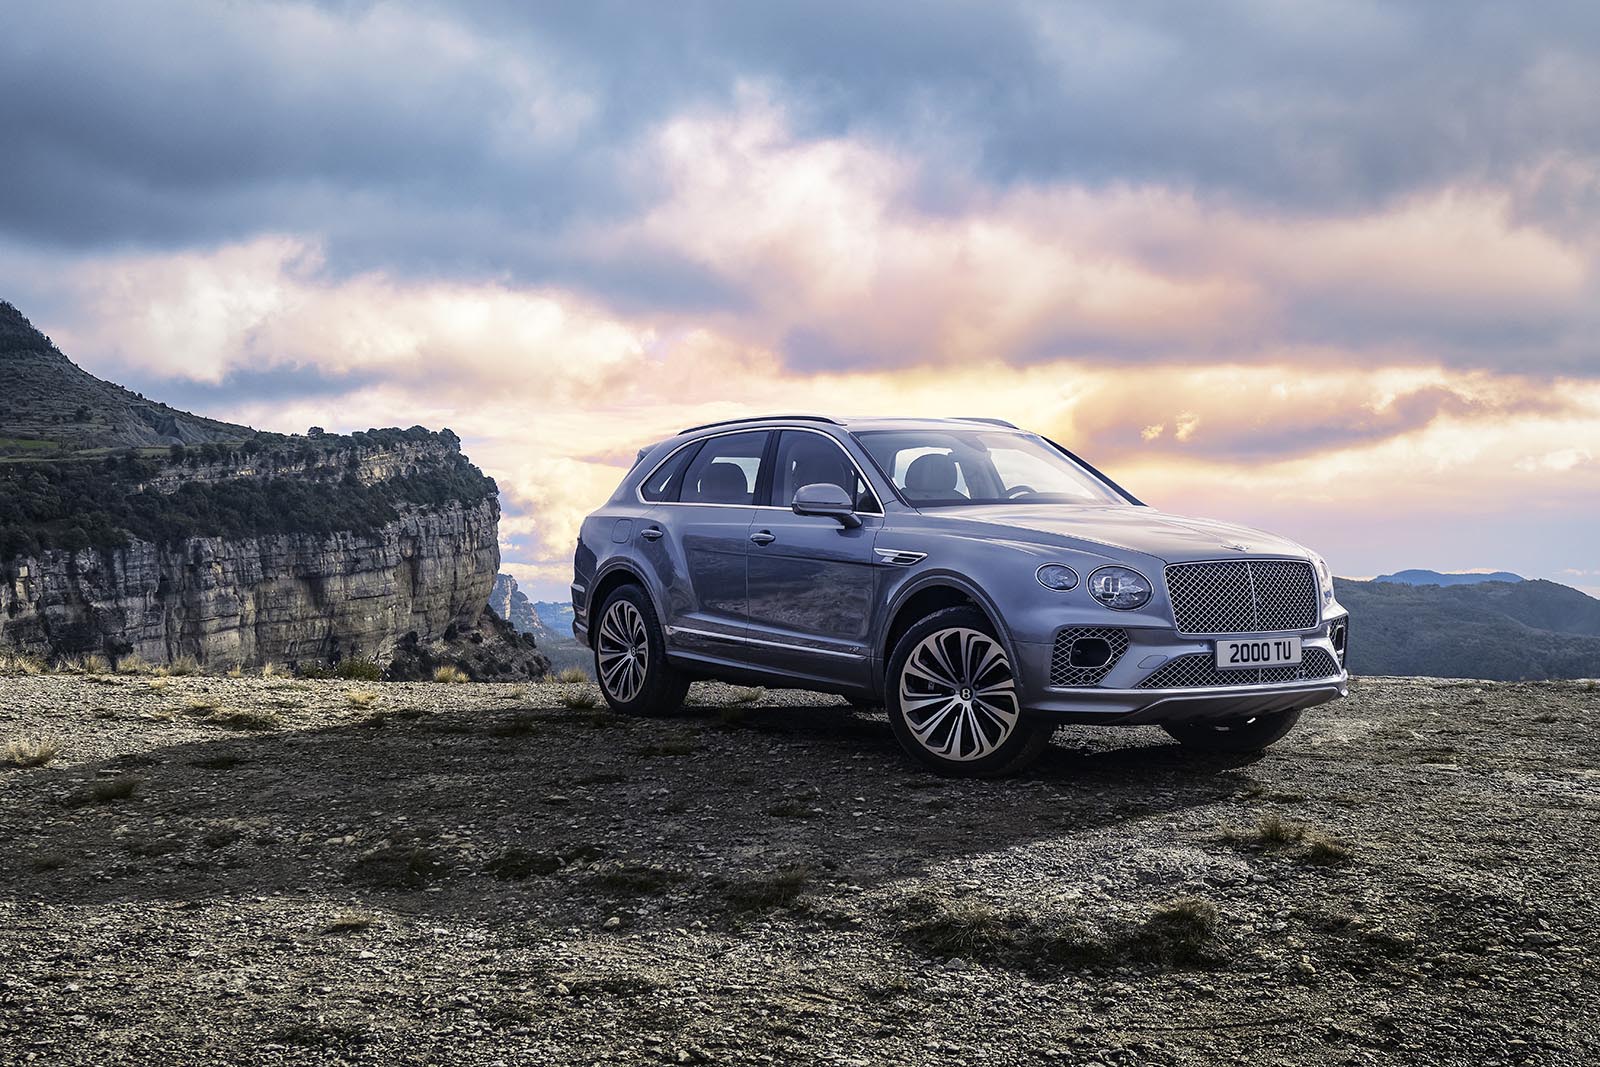 Bentley Bentayga - BENTLEY Bentayga specs & photos - 2015, 2016, 2017, 2018 ... / Bentley freshened up the bentayga's styling for 2021 with a more upright grille, new taillamps, and updated wheel designs.